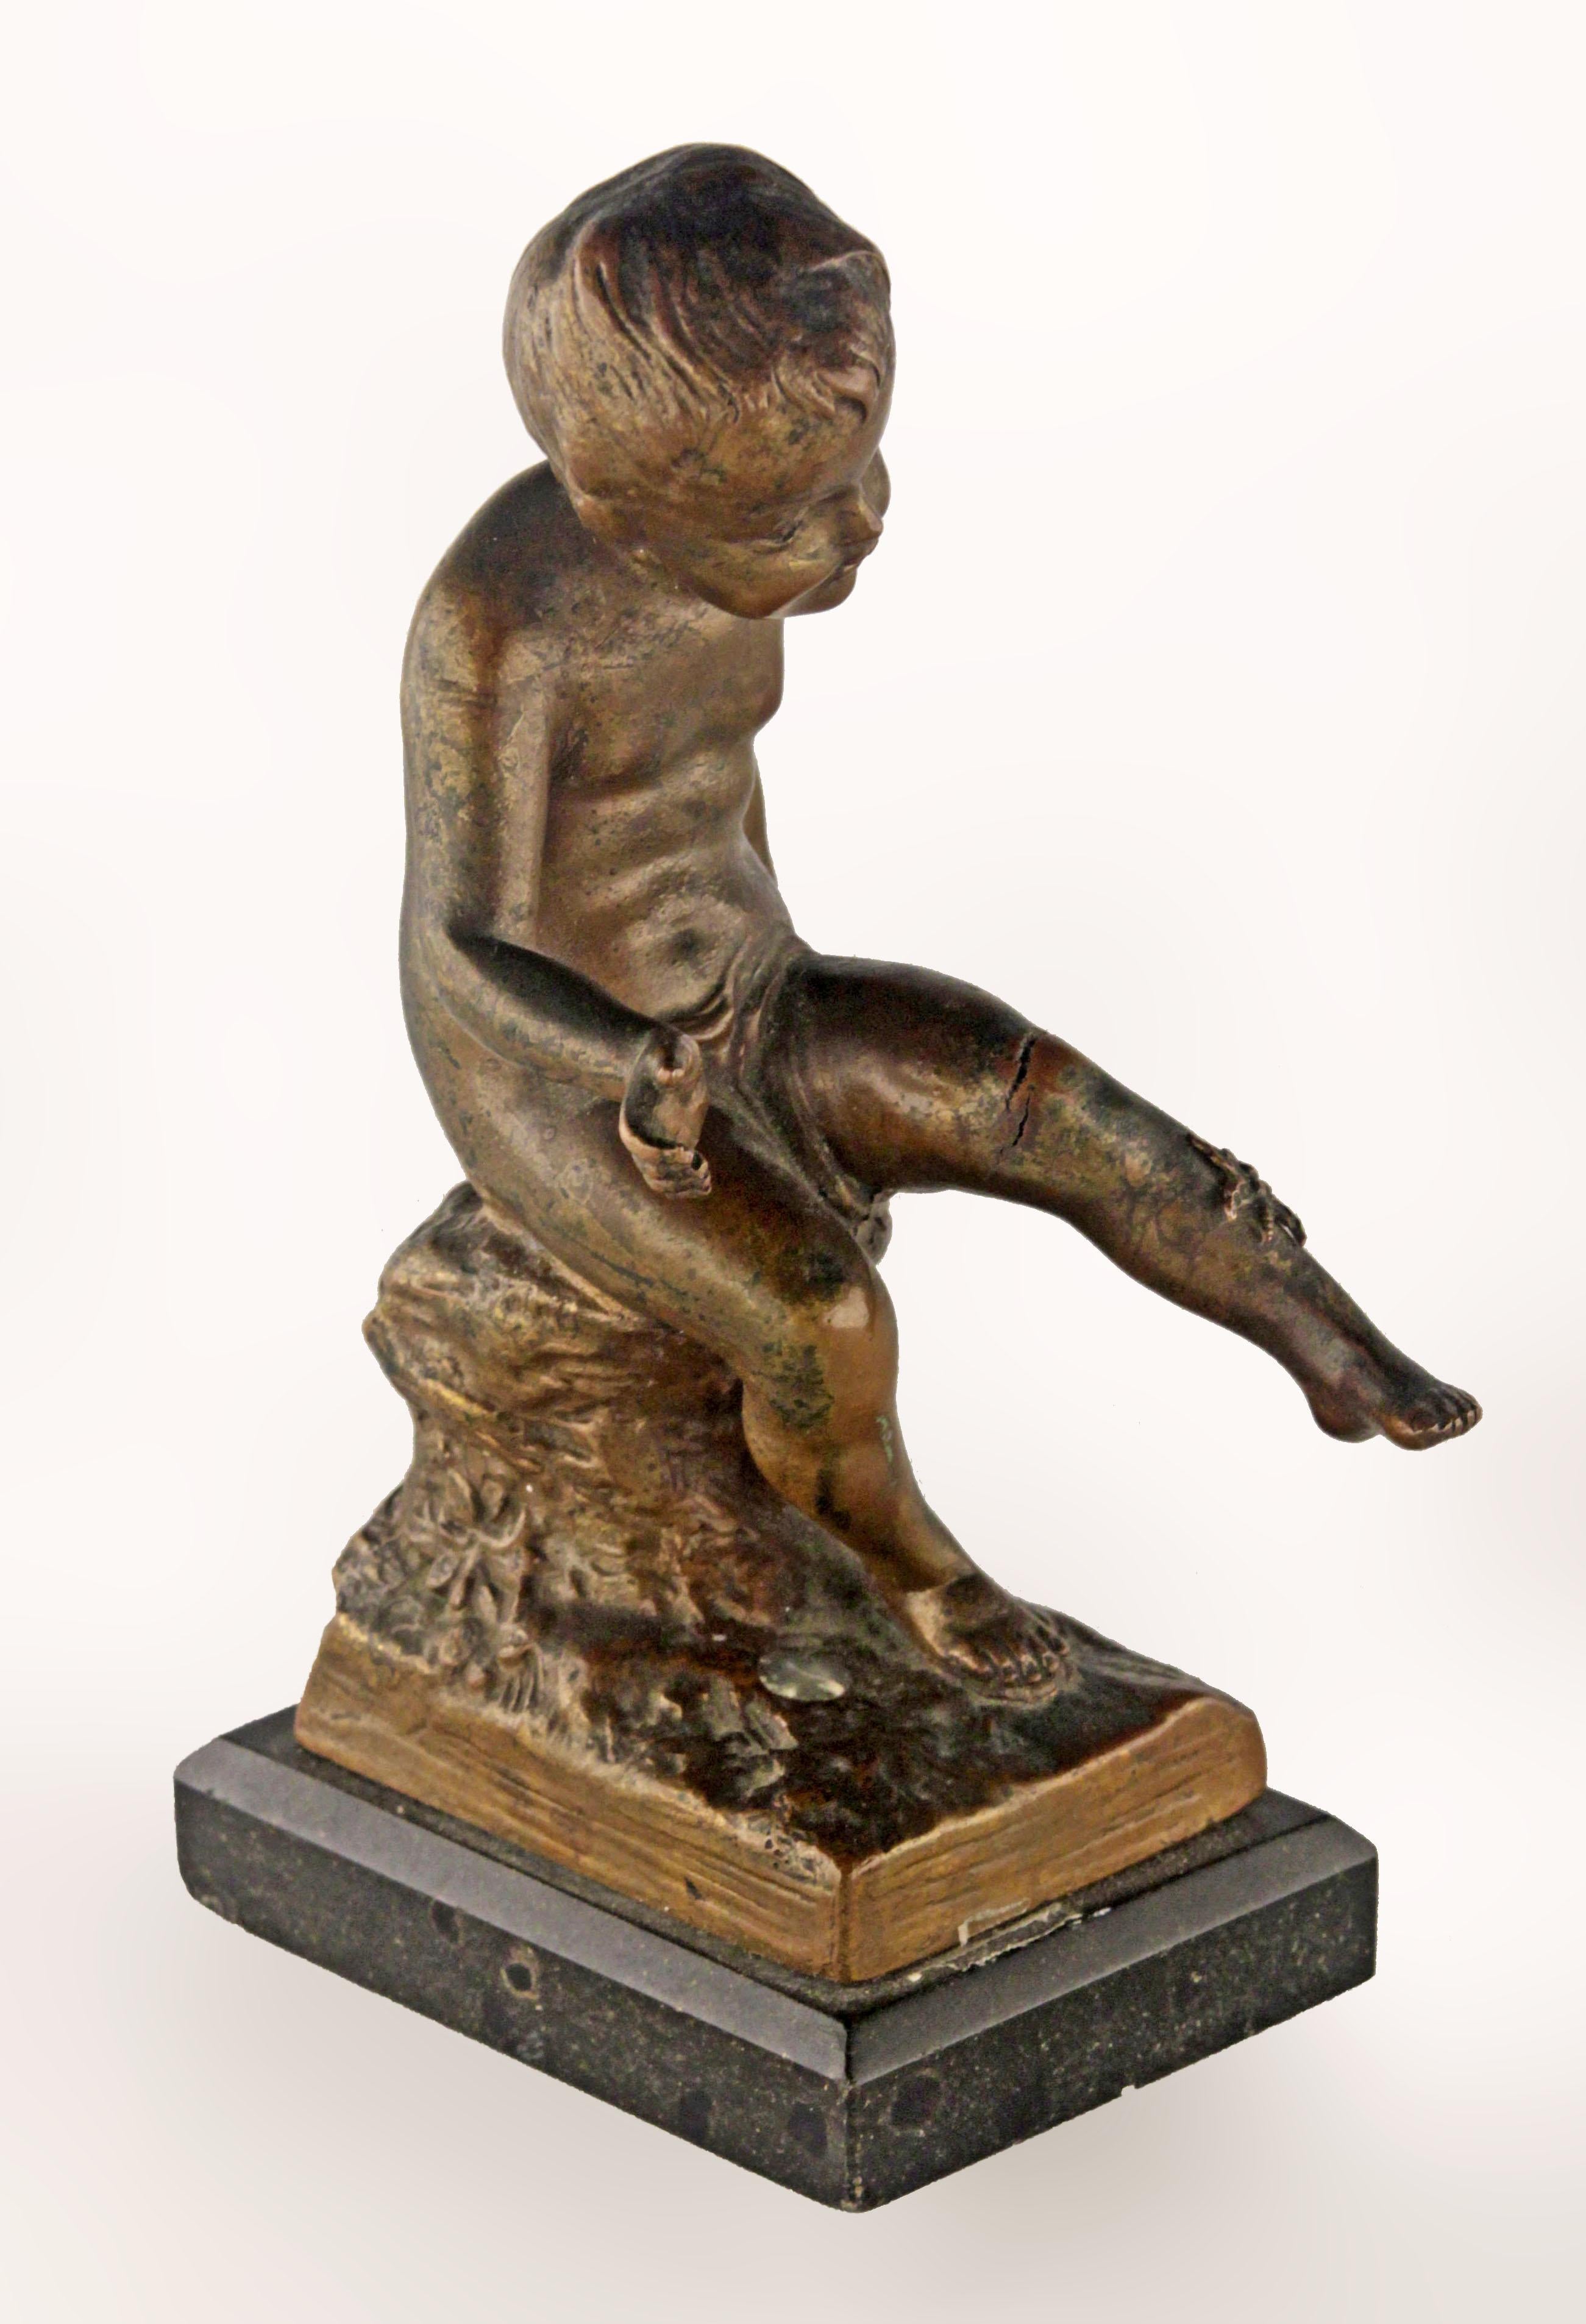 Early 20th century french bronze sculpture with marble base of a sitting boy

By: unknown
Material: copper, bronze, metal, marble
Technique: cast, molded, metalwork, patinated
Dimensions: 3 in x 2 in x 6 in
Date: early 20th century
Style: Belle